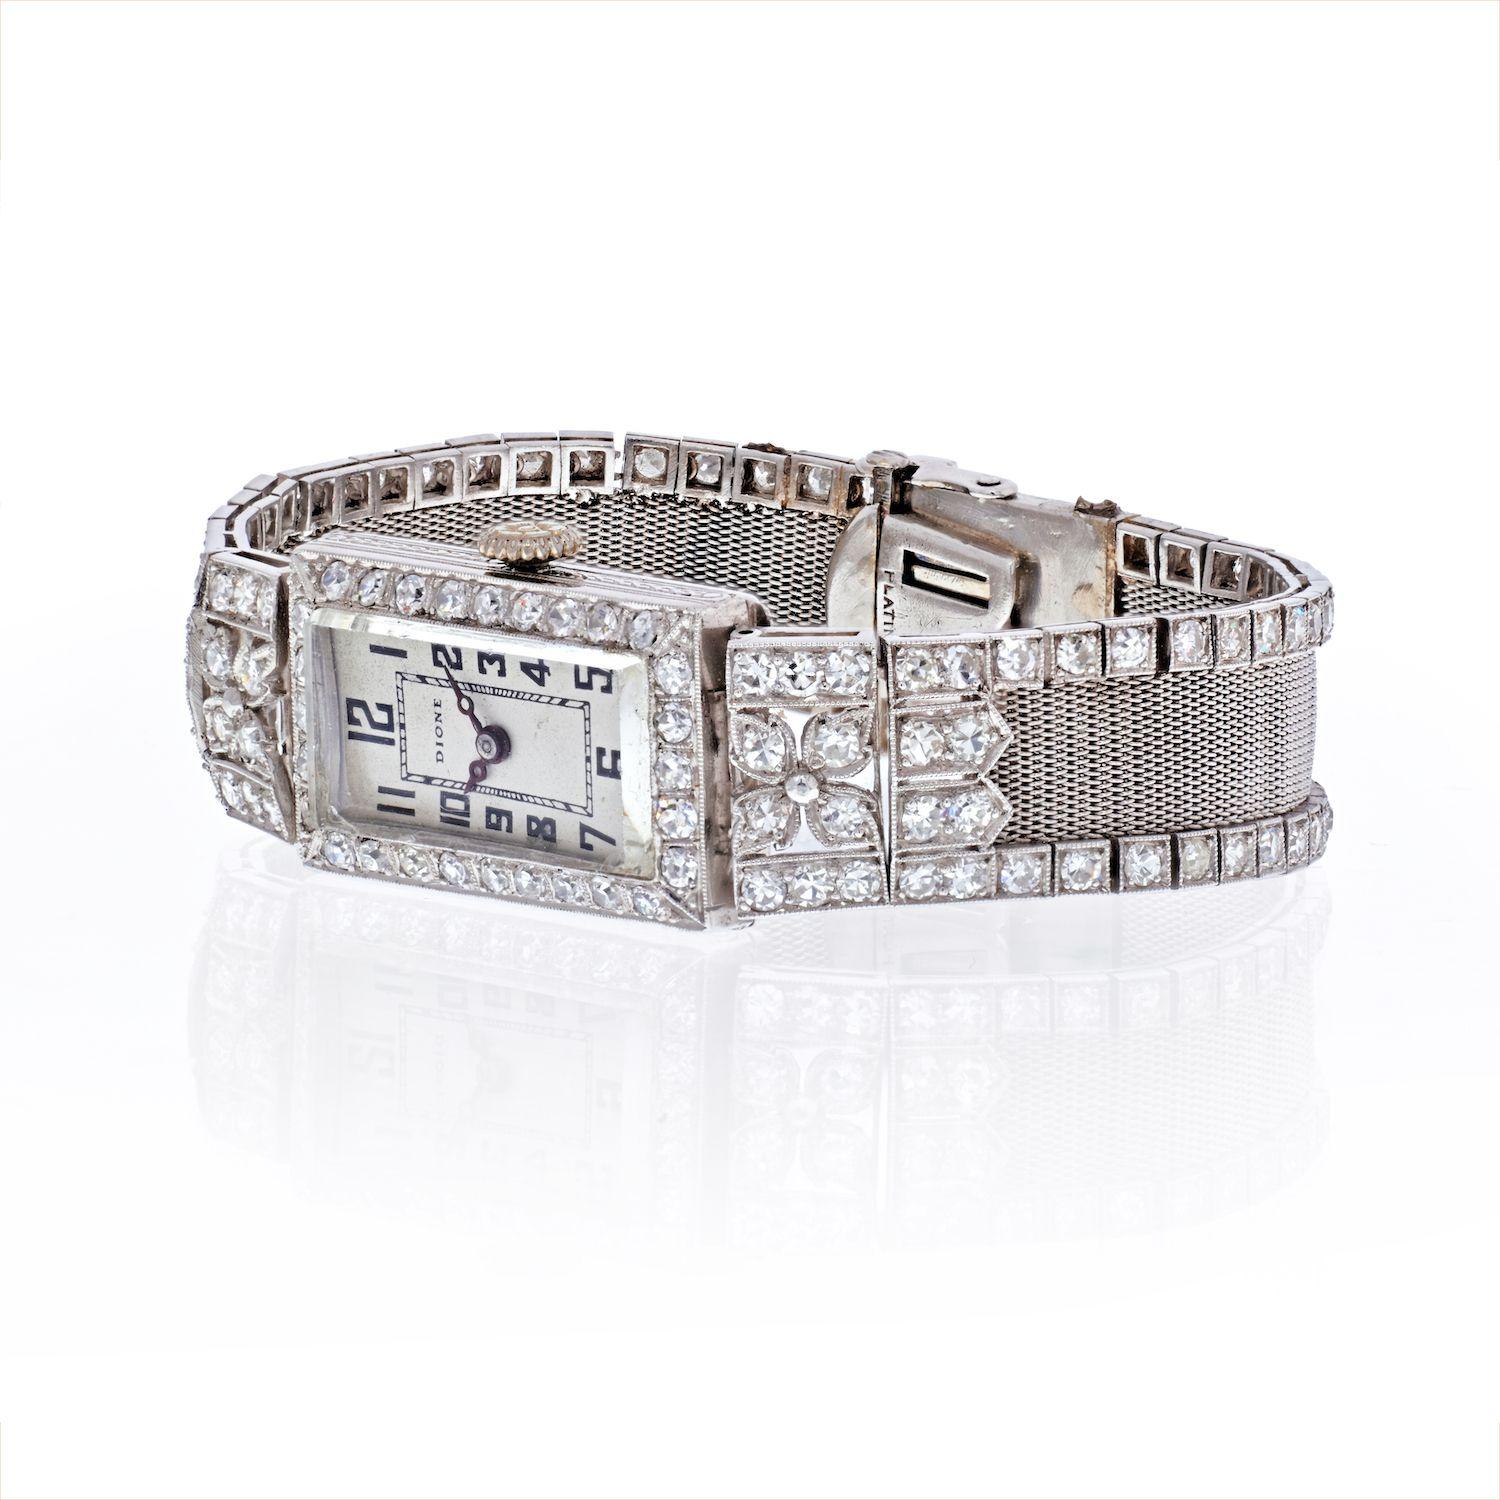 2.60cts Art Deco Platinum and Diamond Mesh Wristwatch. 
Centering a rectangular dial framed and flanked by single cut diamonds, and the mesh strap edged by a continuous line of single cut diamonds approximately 2.70 cts., Swiss movement, circa 1920.